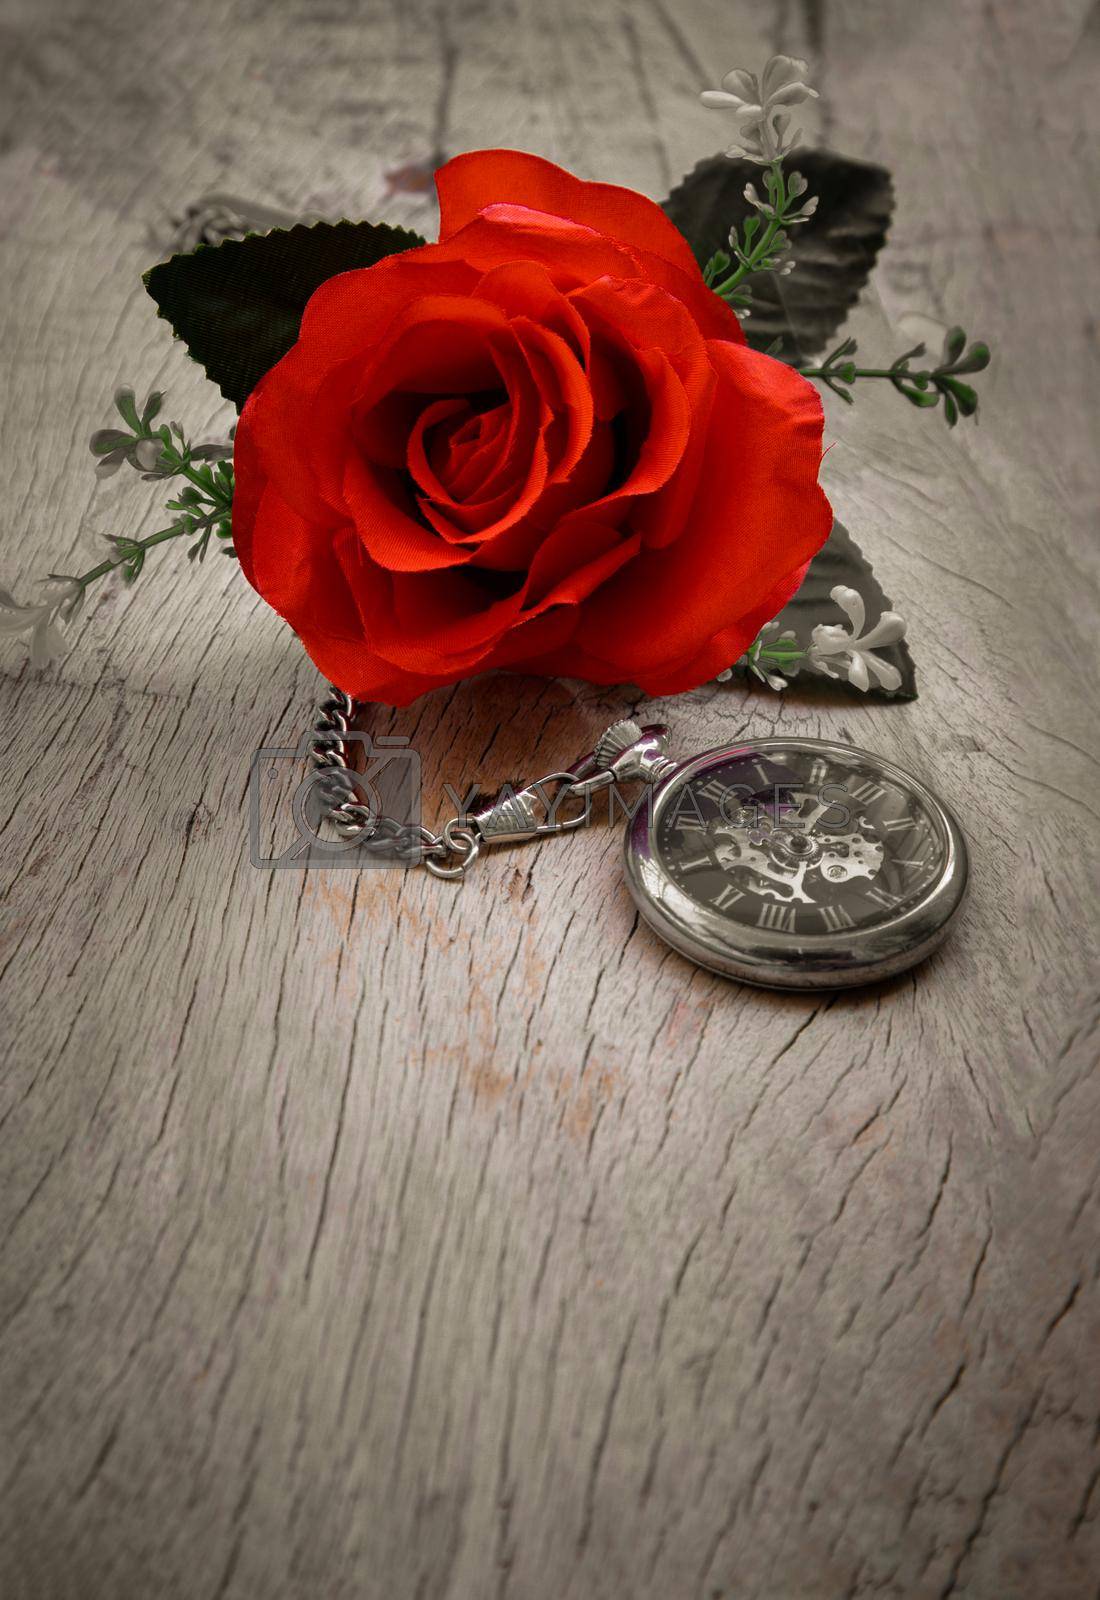 Red rose flower and A retro pocket watch on old wooden board background. Copy space, No focus, specifically.